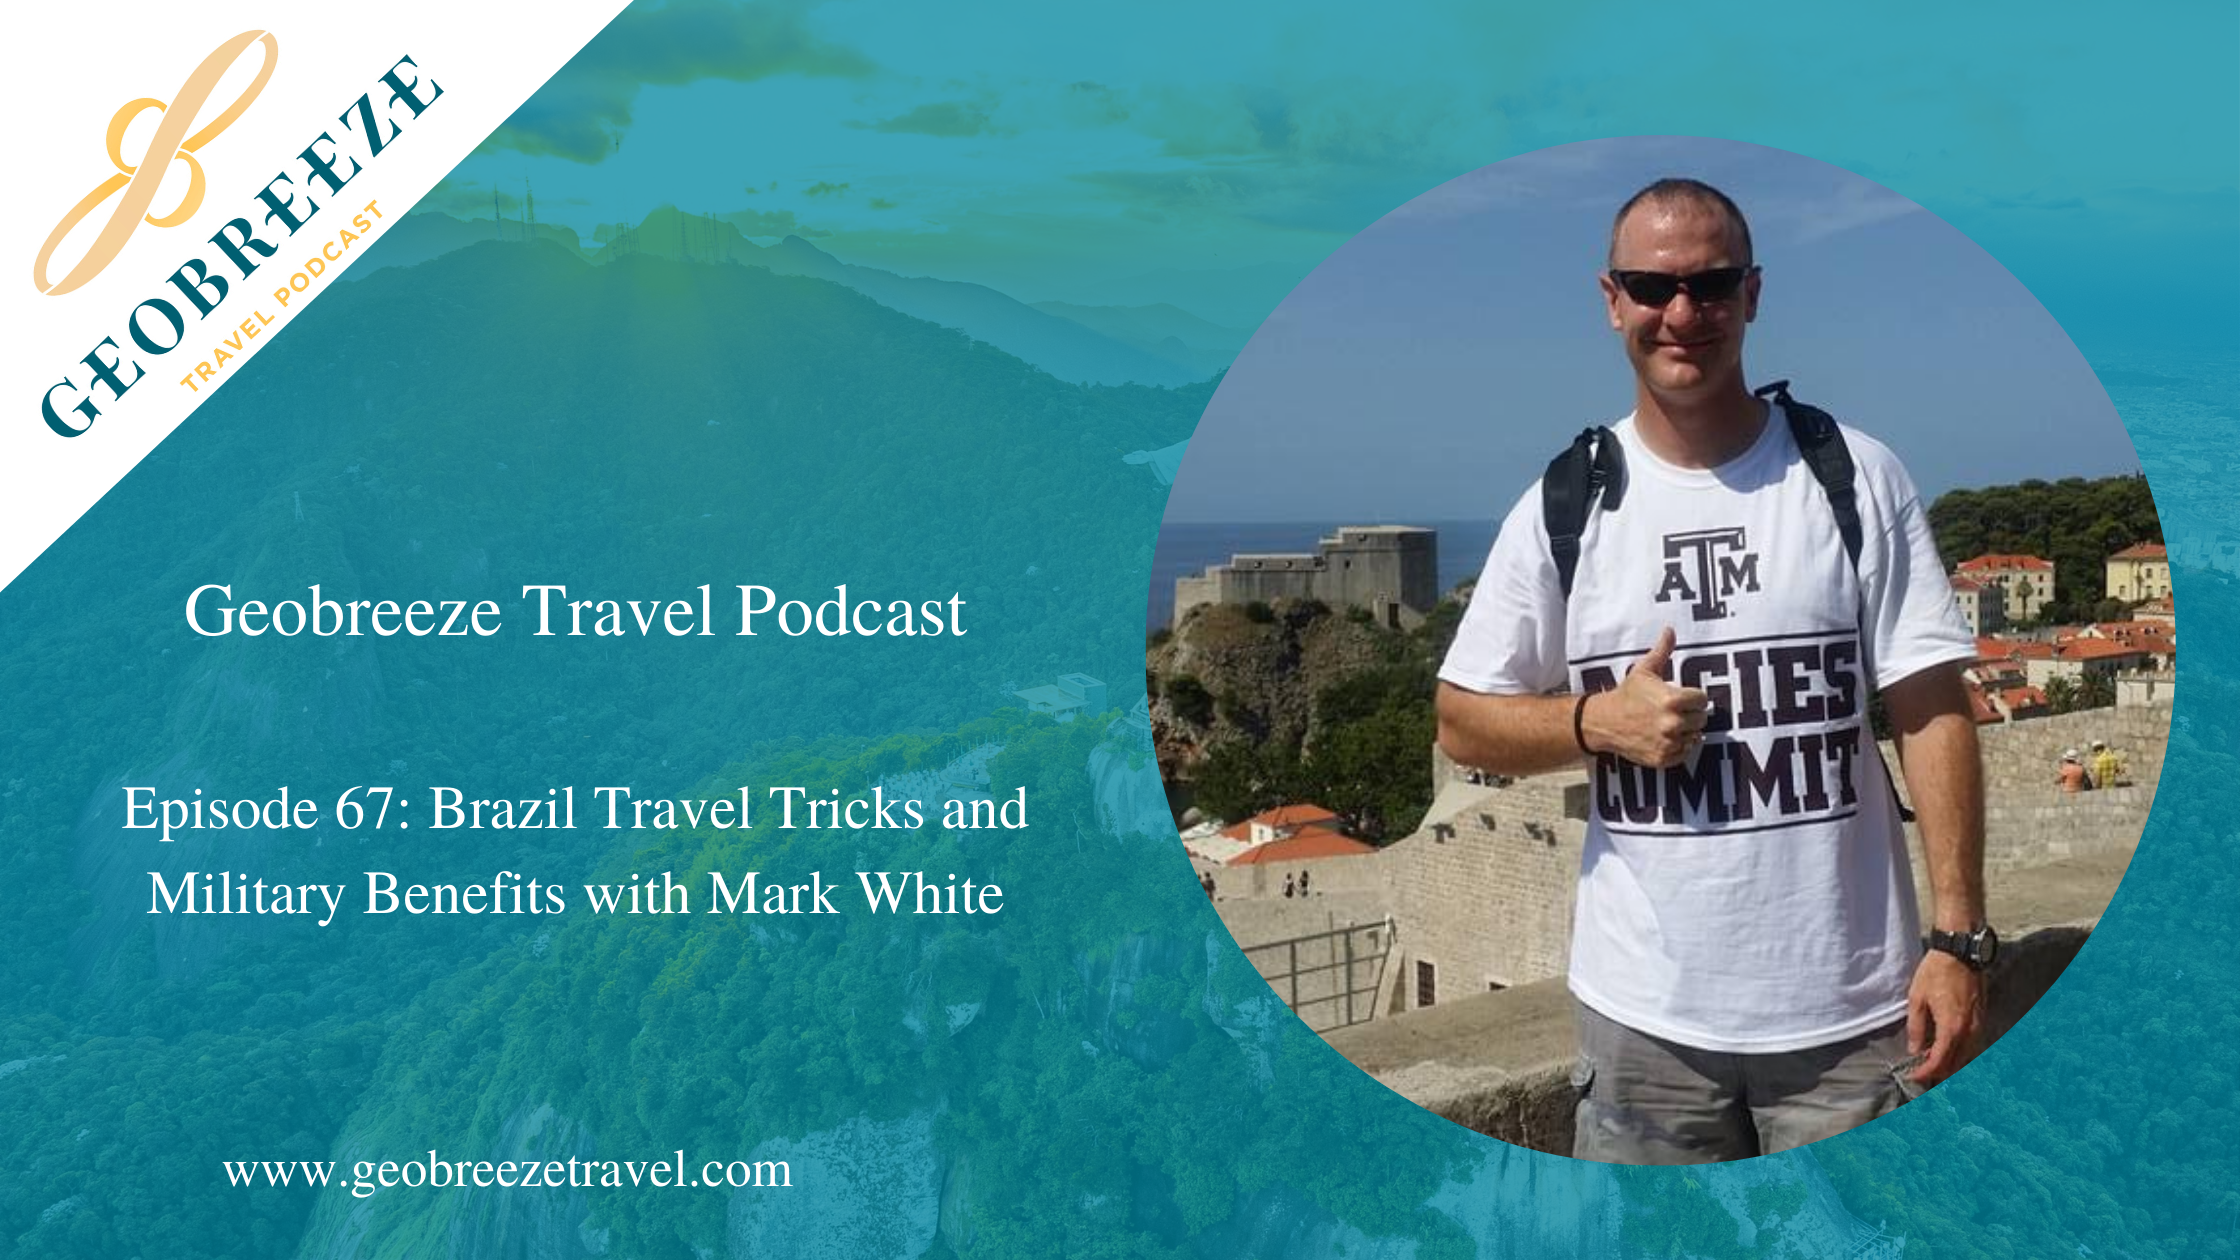 Episode 67: Brazil Travel Tricks and Military Benefits with Mark White